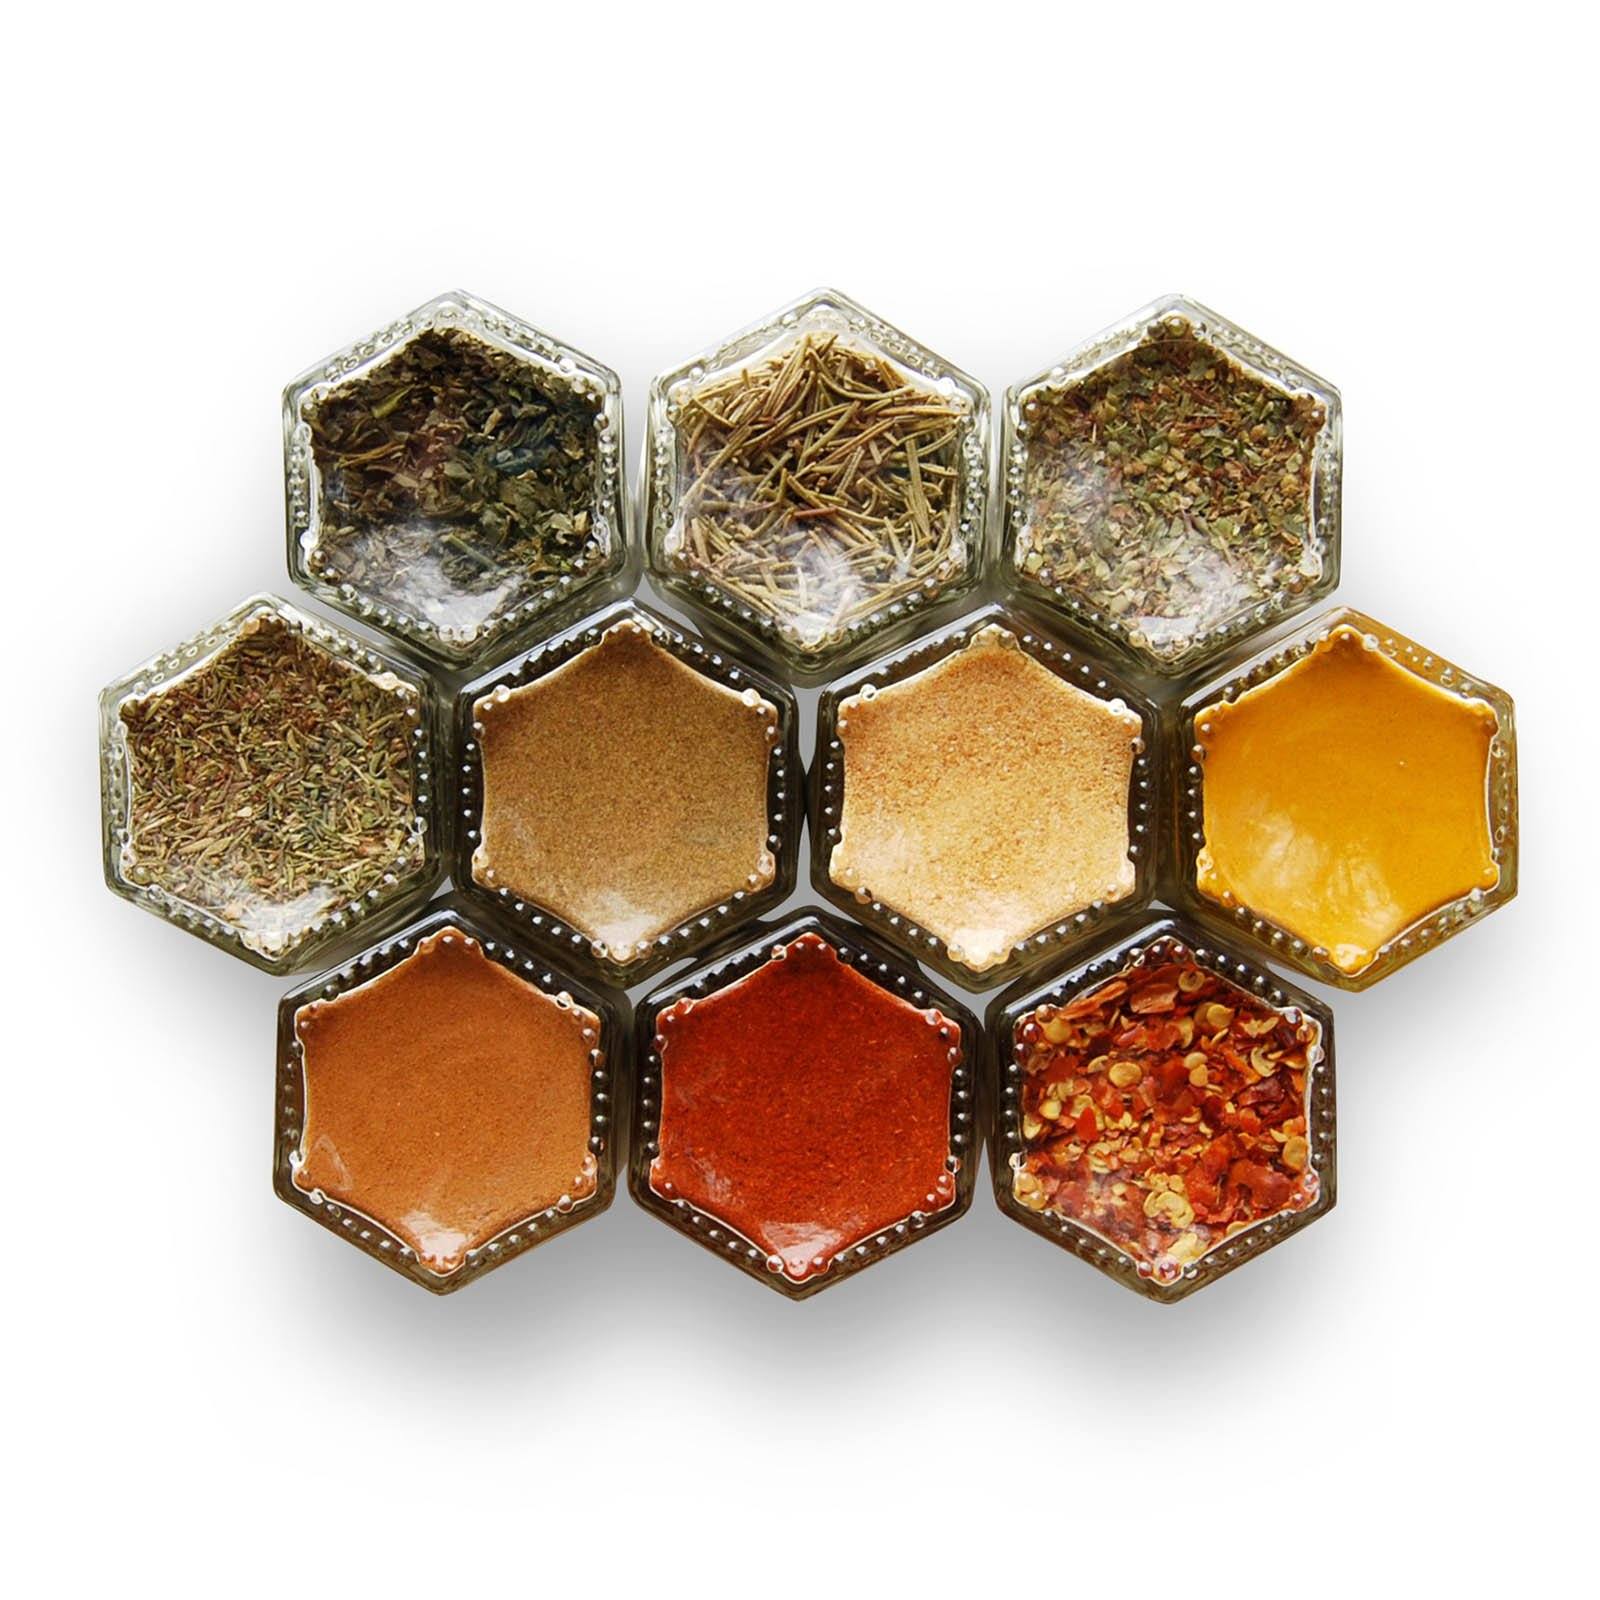 15-Pack Magnetic Spice Jars Hexagon Glass Spice Jars With